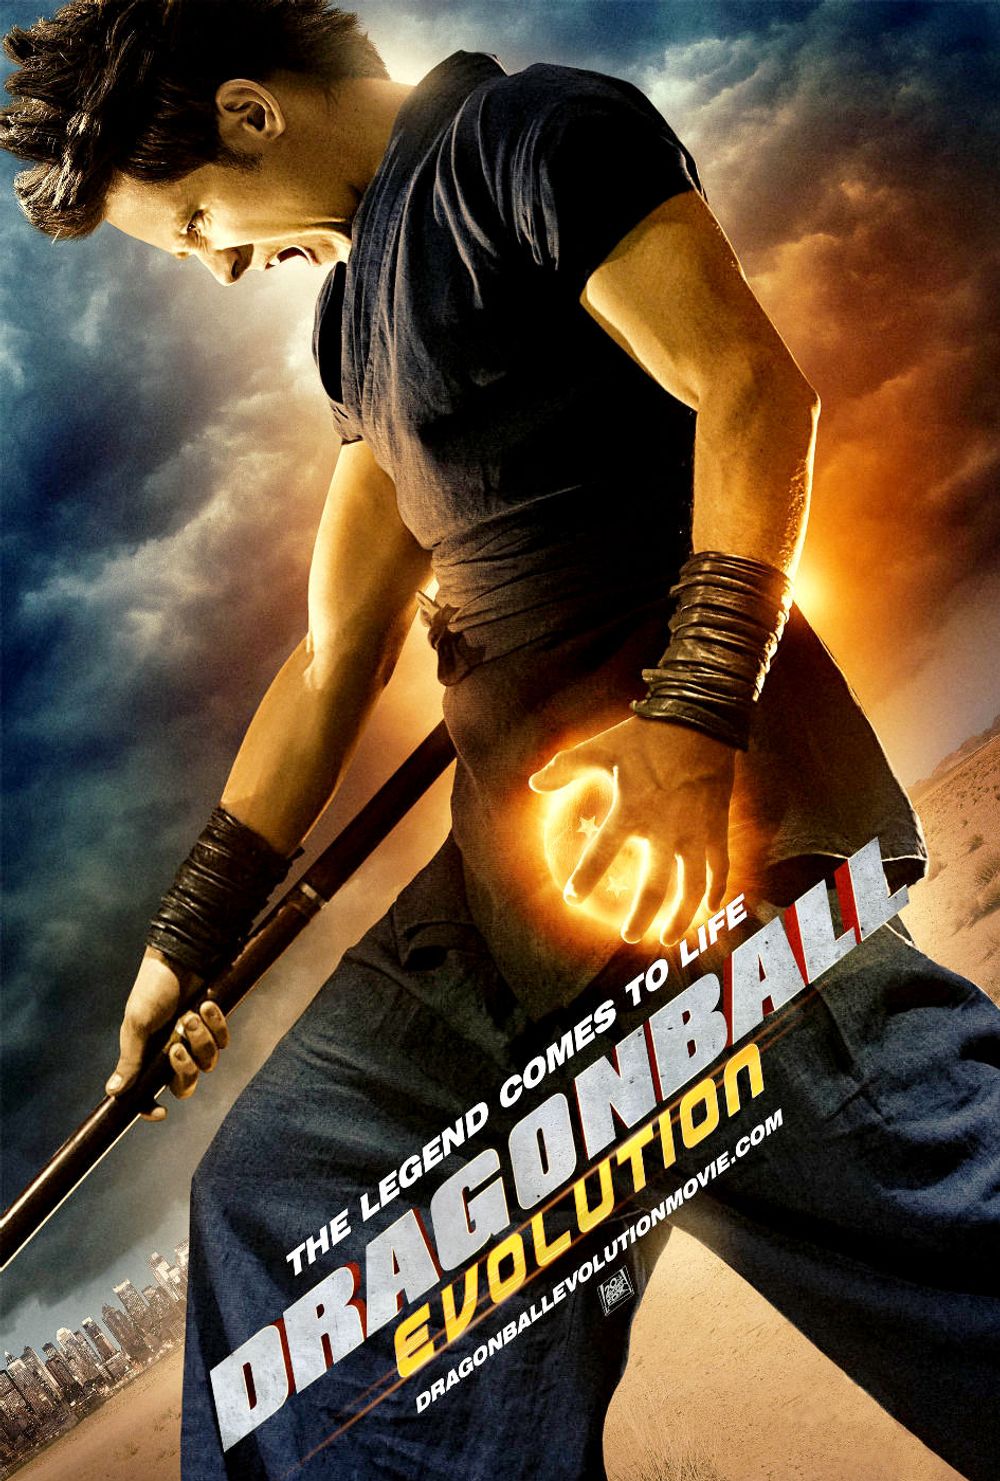 Dragonball Evolution Introduced James Marsters to the Franchise